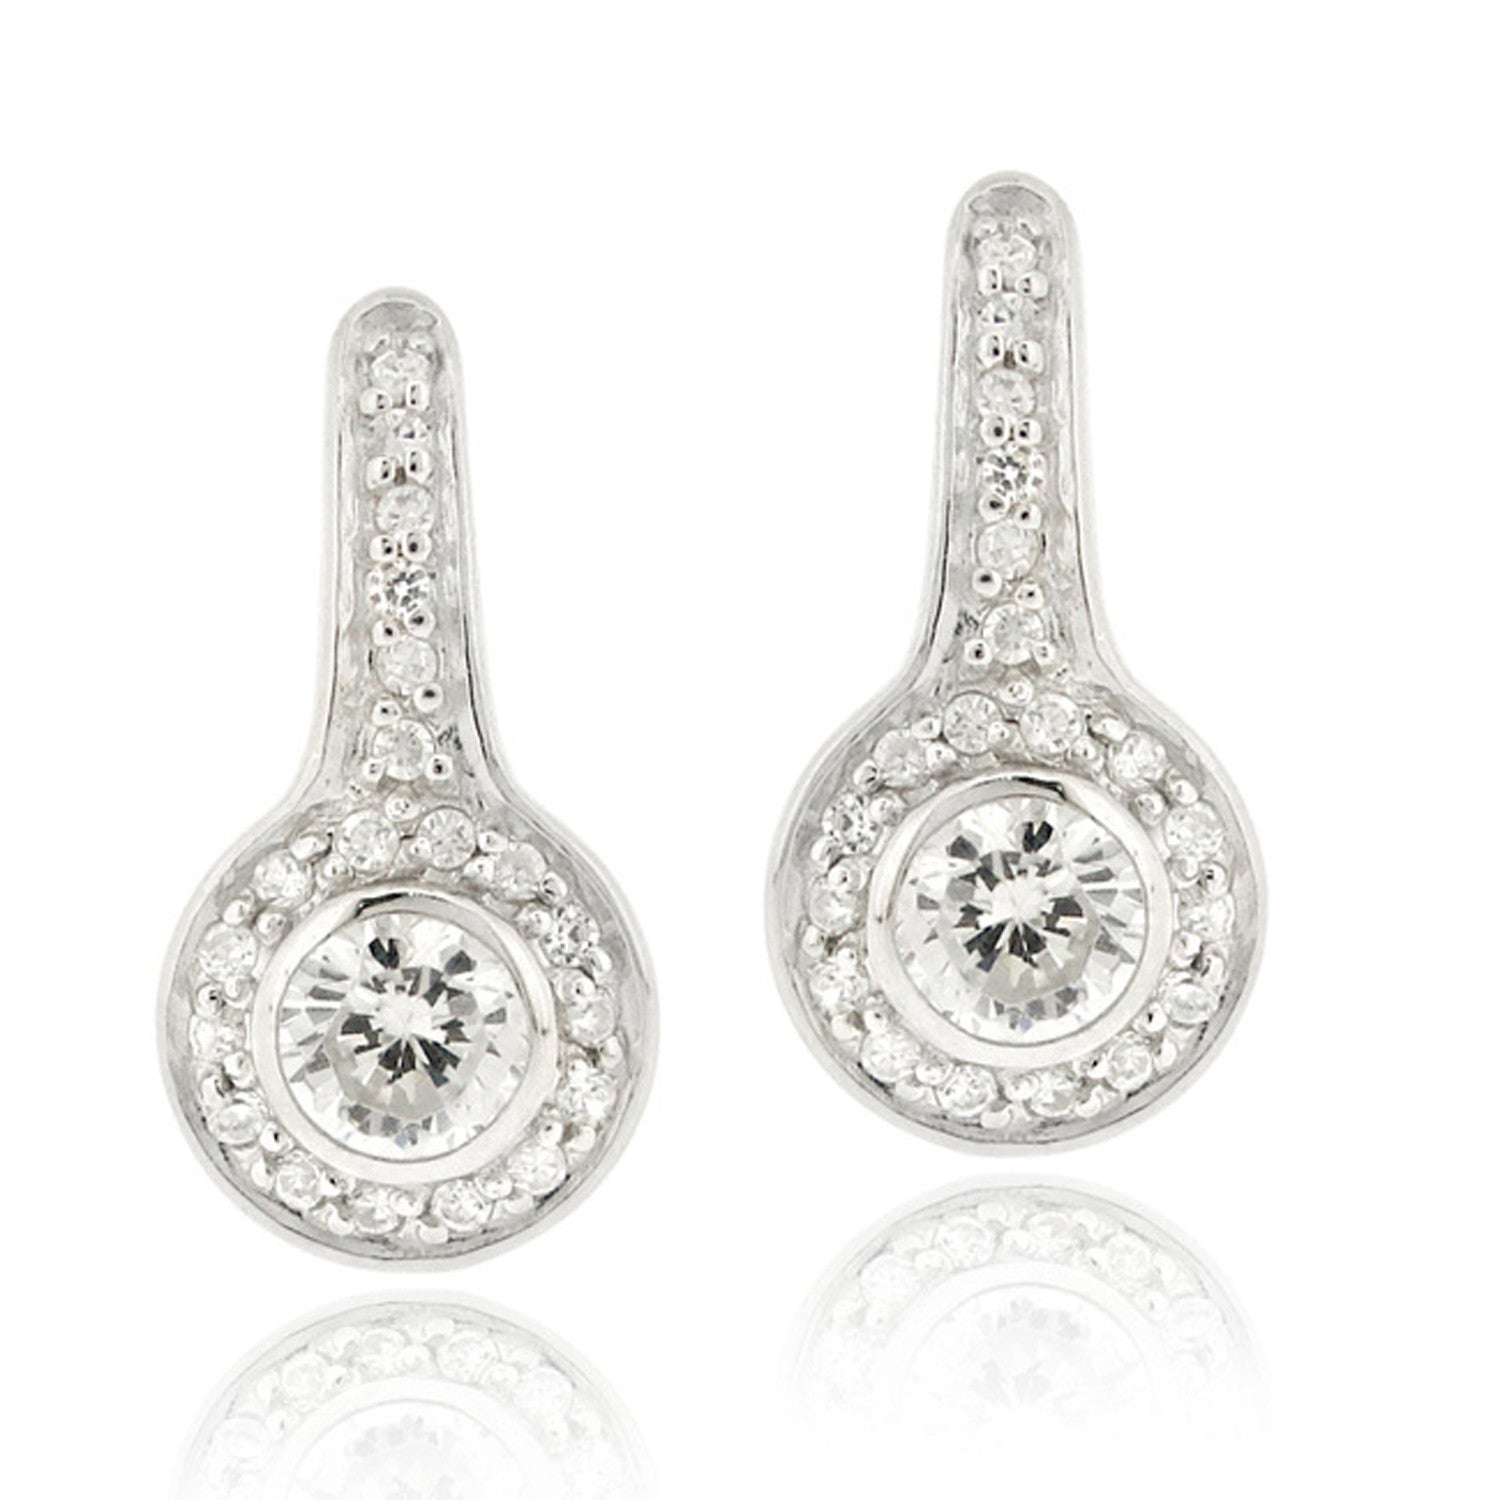 Sterling Silver Leverback Earrings With Cubic Zirconia Accents - Silver